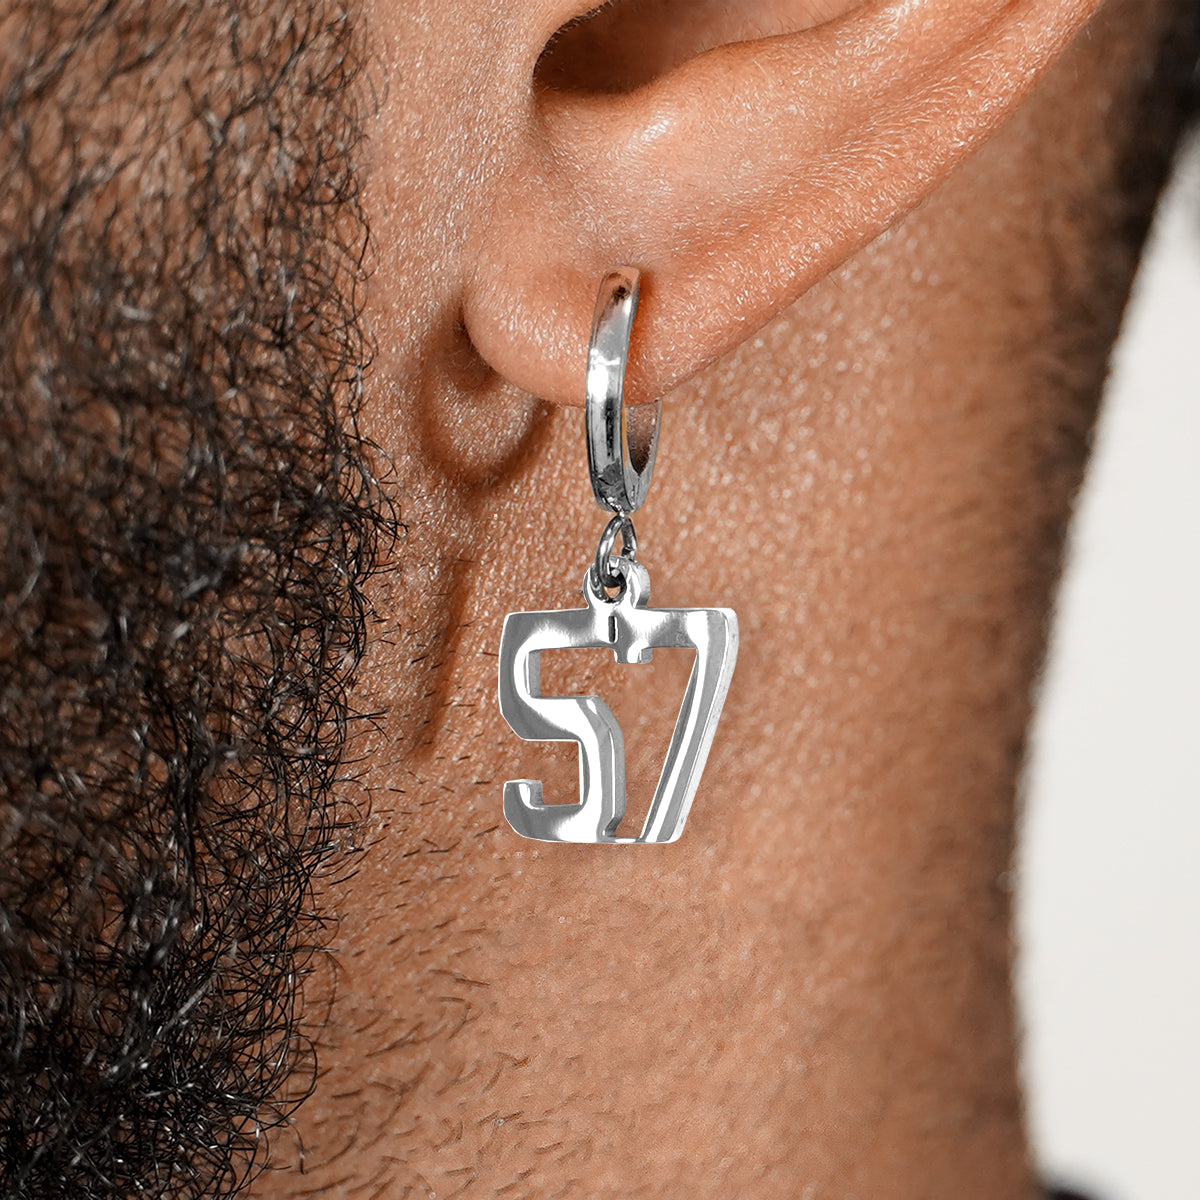 57 Number Earring - Stainless Steel